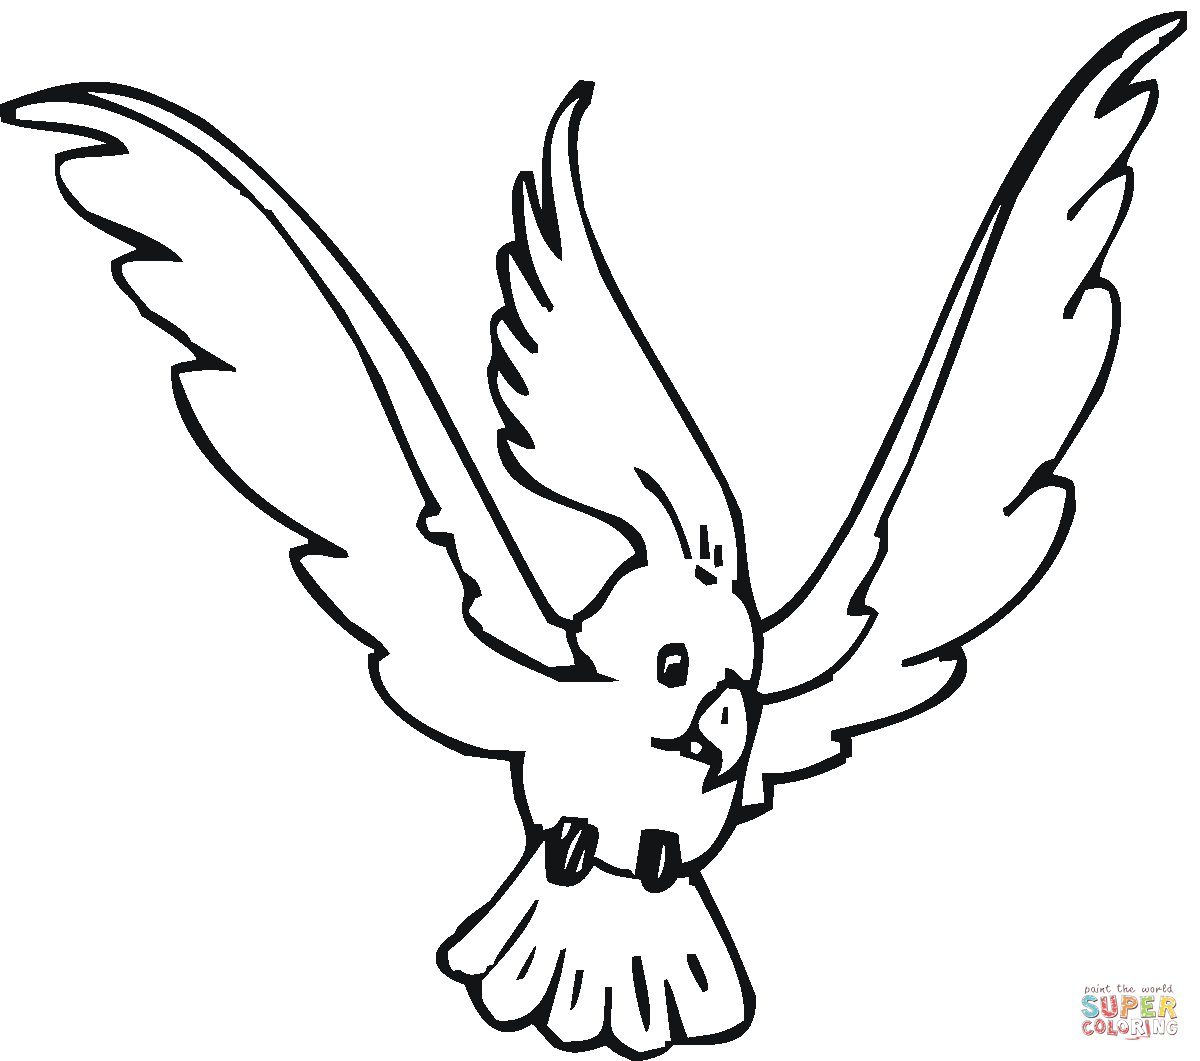 White Cockatoo coloring #16, Download drawings